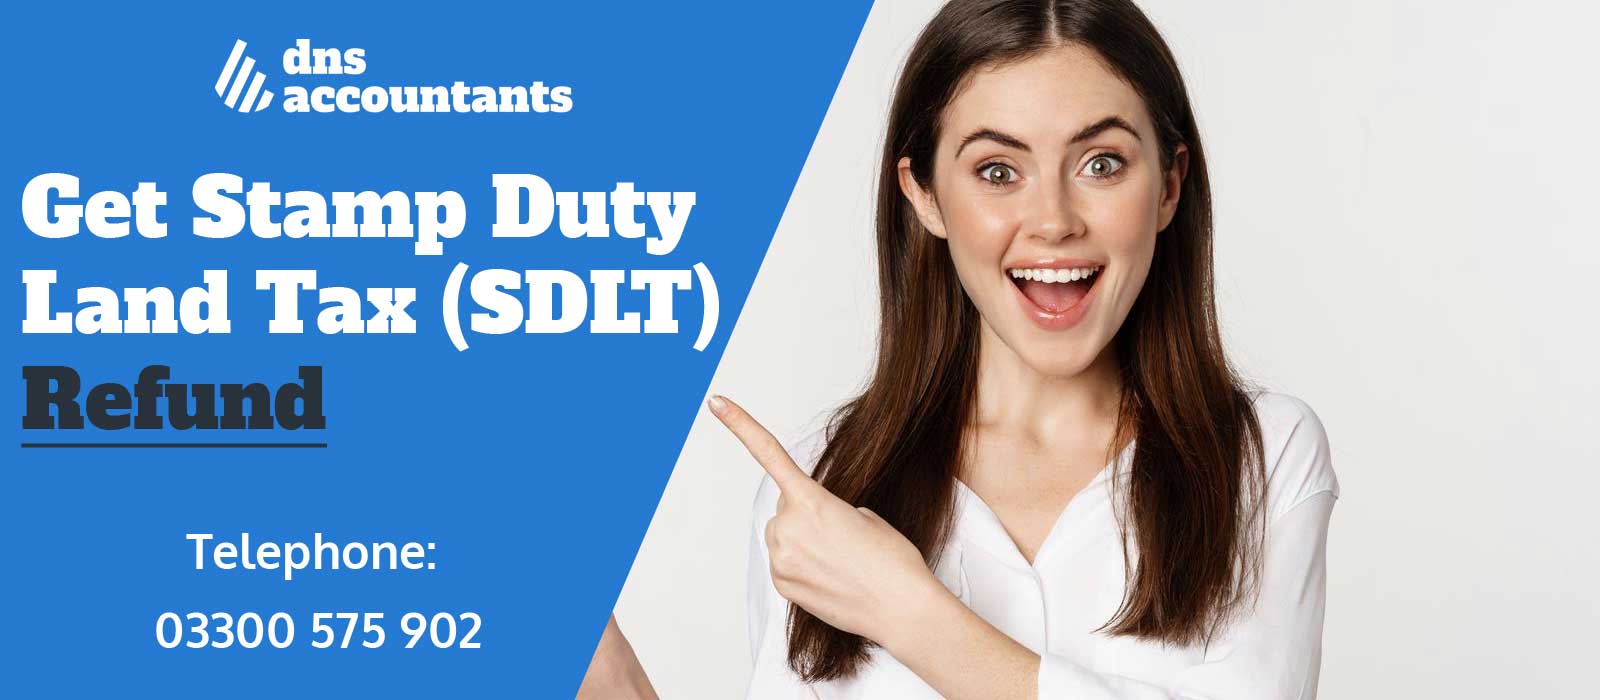 how-to-get-stamp-duty-land-tax-refund-claiming-sdlt-refund